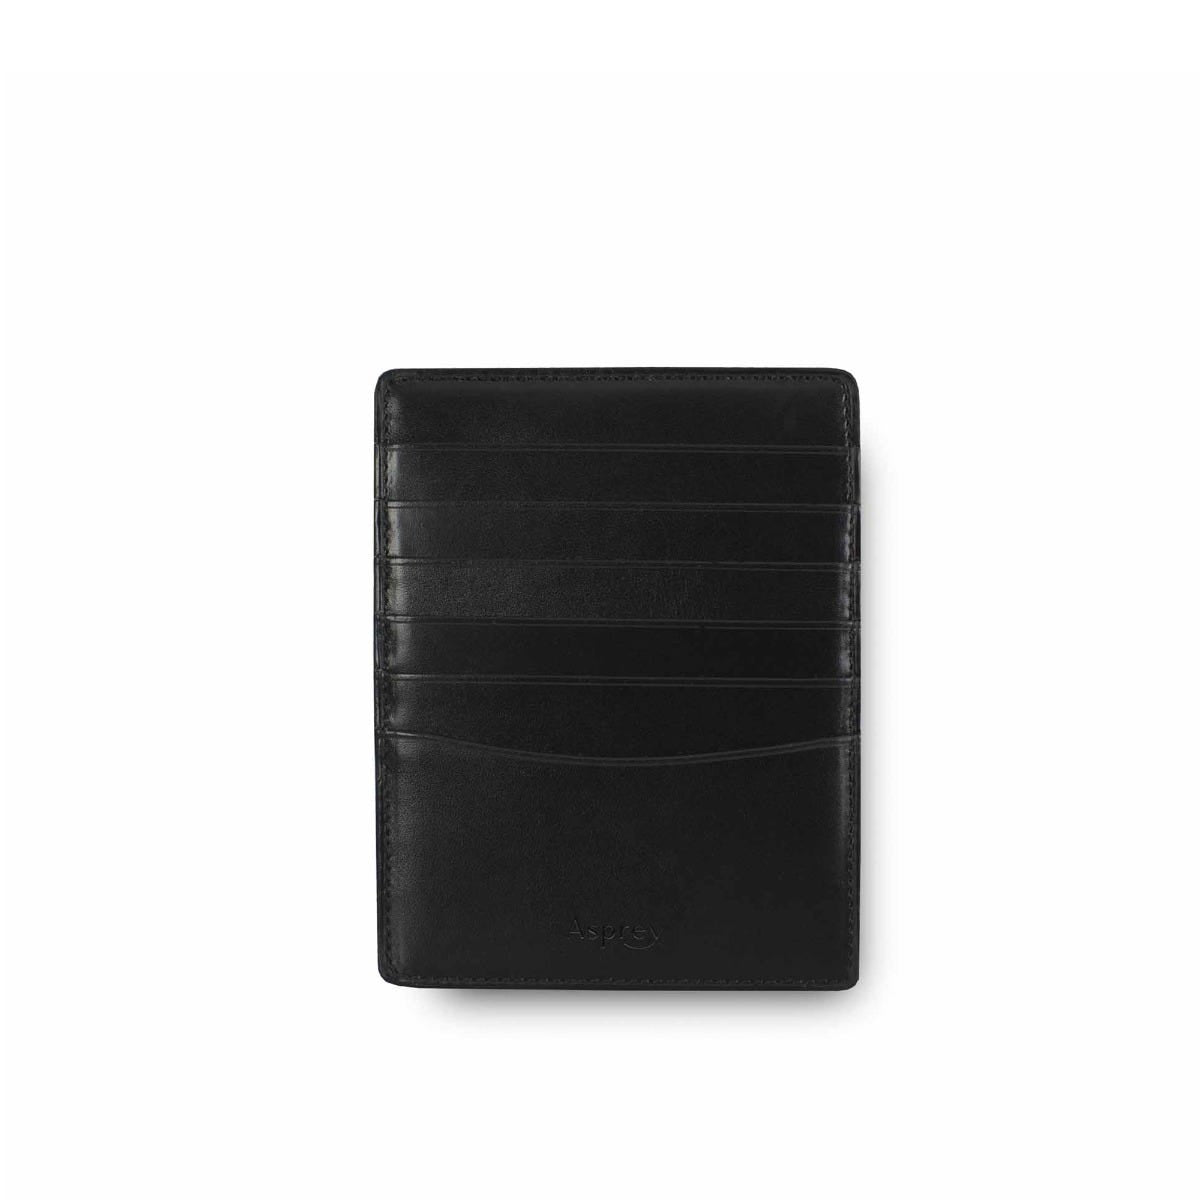 Hanover 6cc Card Holder in Saddle Leather